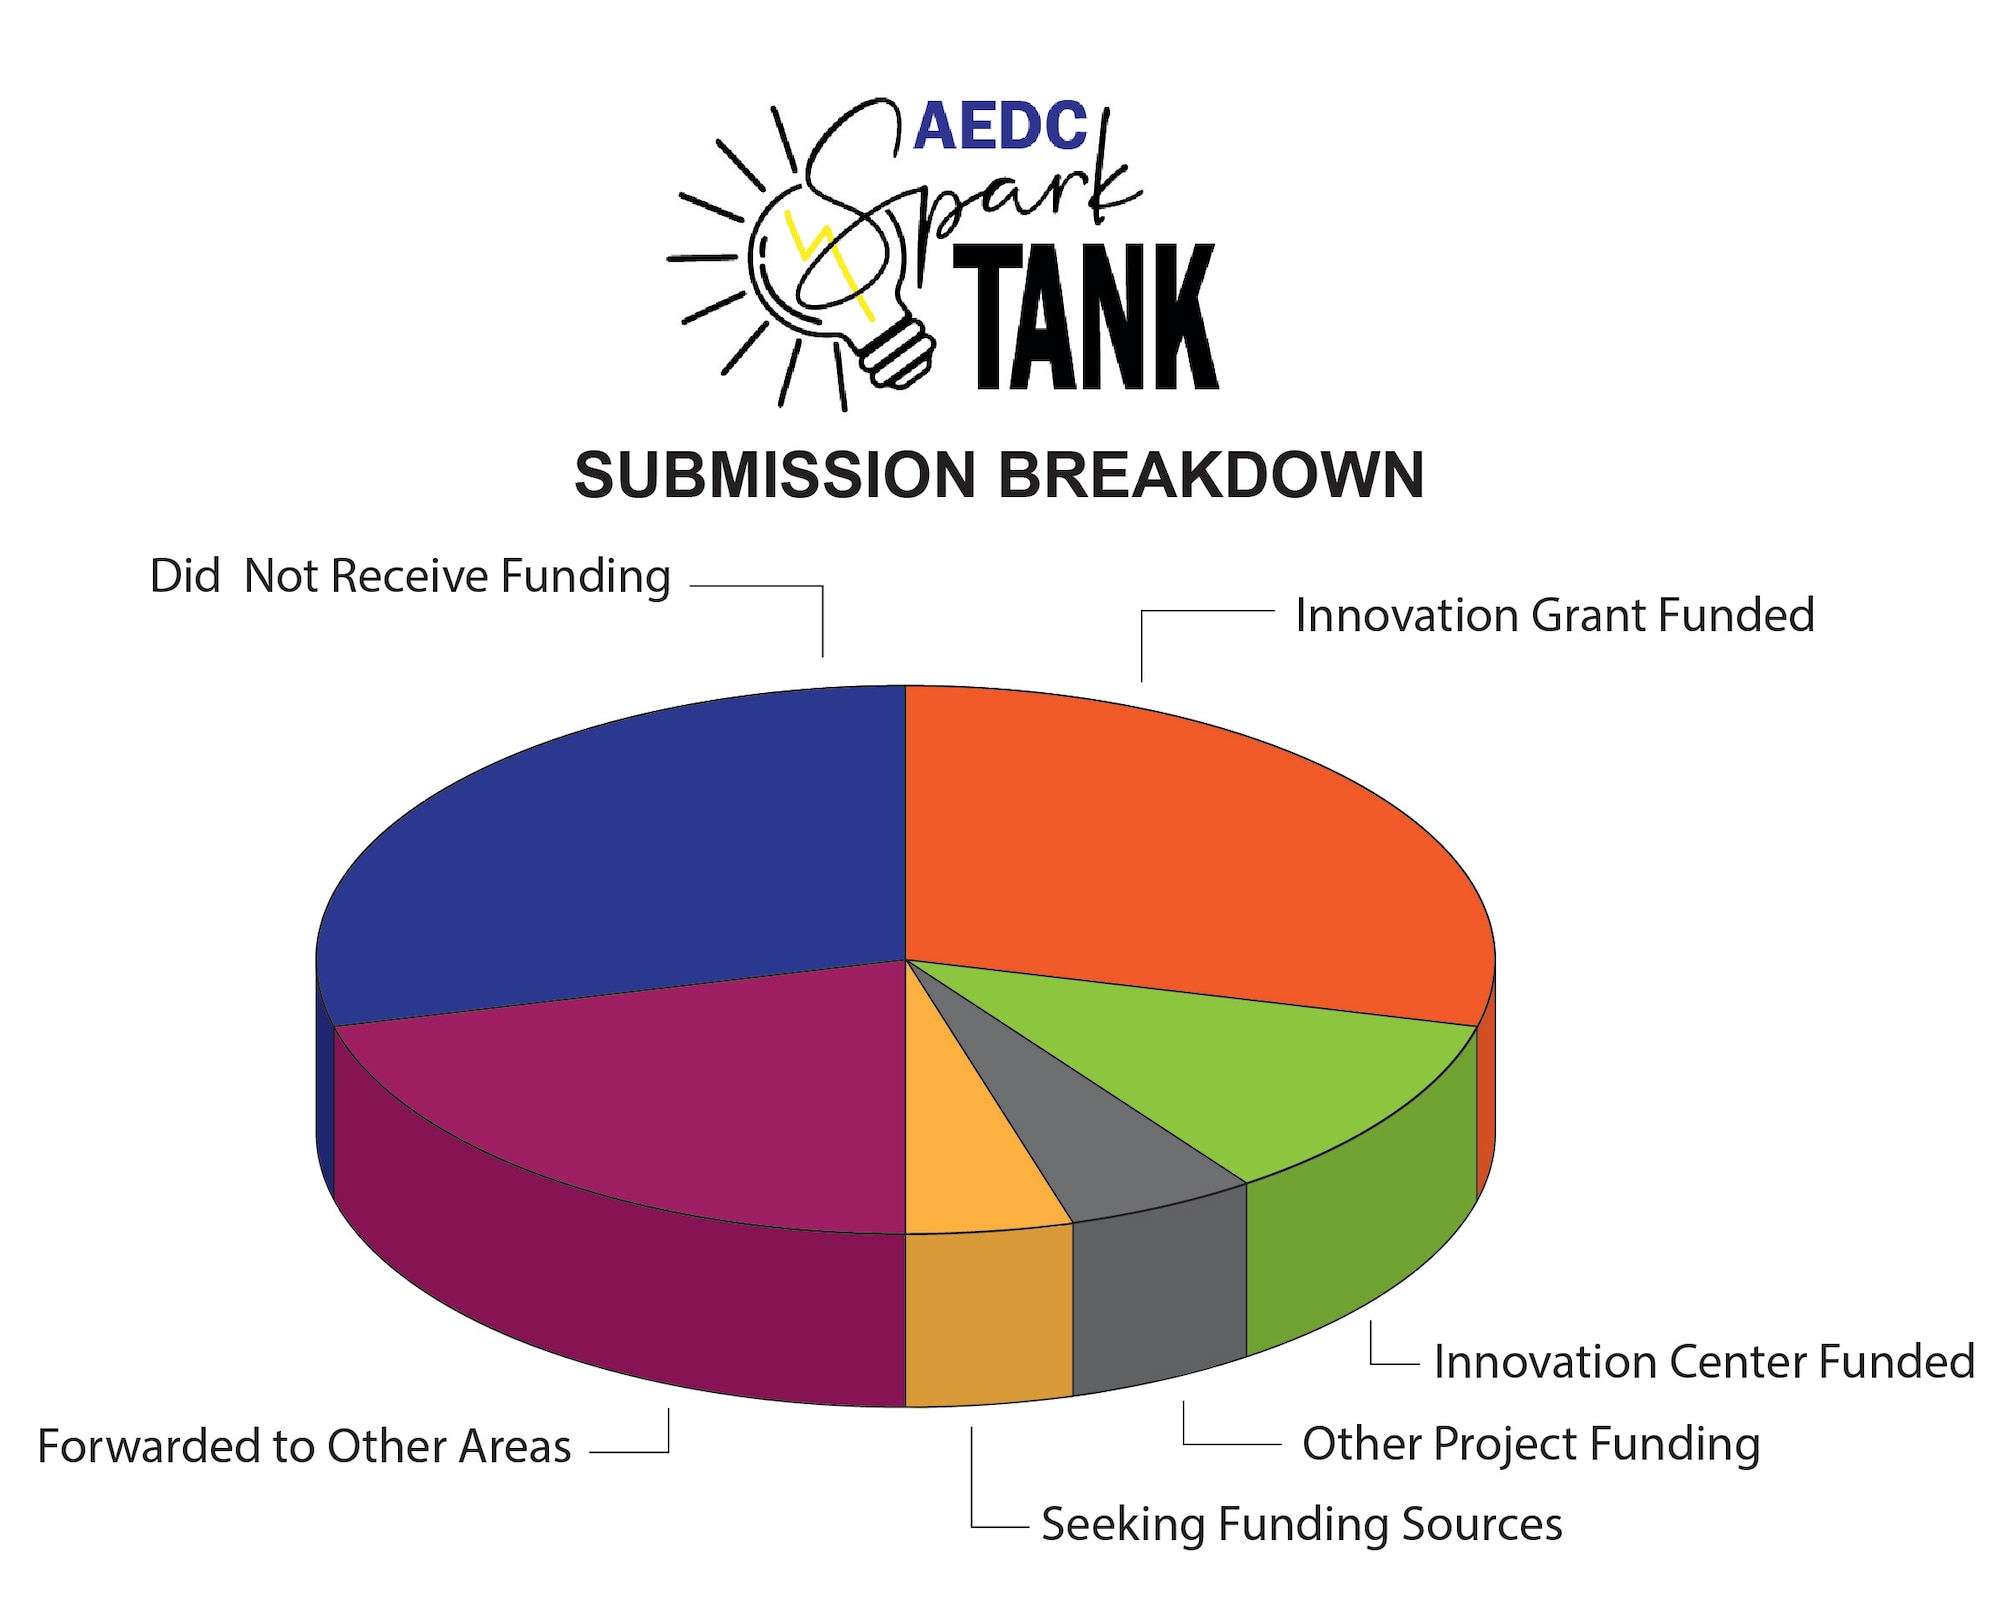 This pie chart shows the funding breakdown for the proposals submitted for consideration in the Arnold Engineering Development Complex Spark Tank. The AEDC Spark Tank allowed members of the AEDC workforce to propose suggestions for how to improve AEDC process, products and test capabilities. Eight of the 14 projects presented were awarded funding. Five of the eight awardees received funding via the AEDC Innovation Grant. Two were funded through the AEDC Innovation Center, as those proposals pertain to the facility. The remaining awardee received funds from a long-range planning project. (U.S. Air Force graphic by Brooke Brumley)